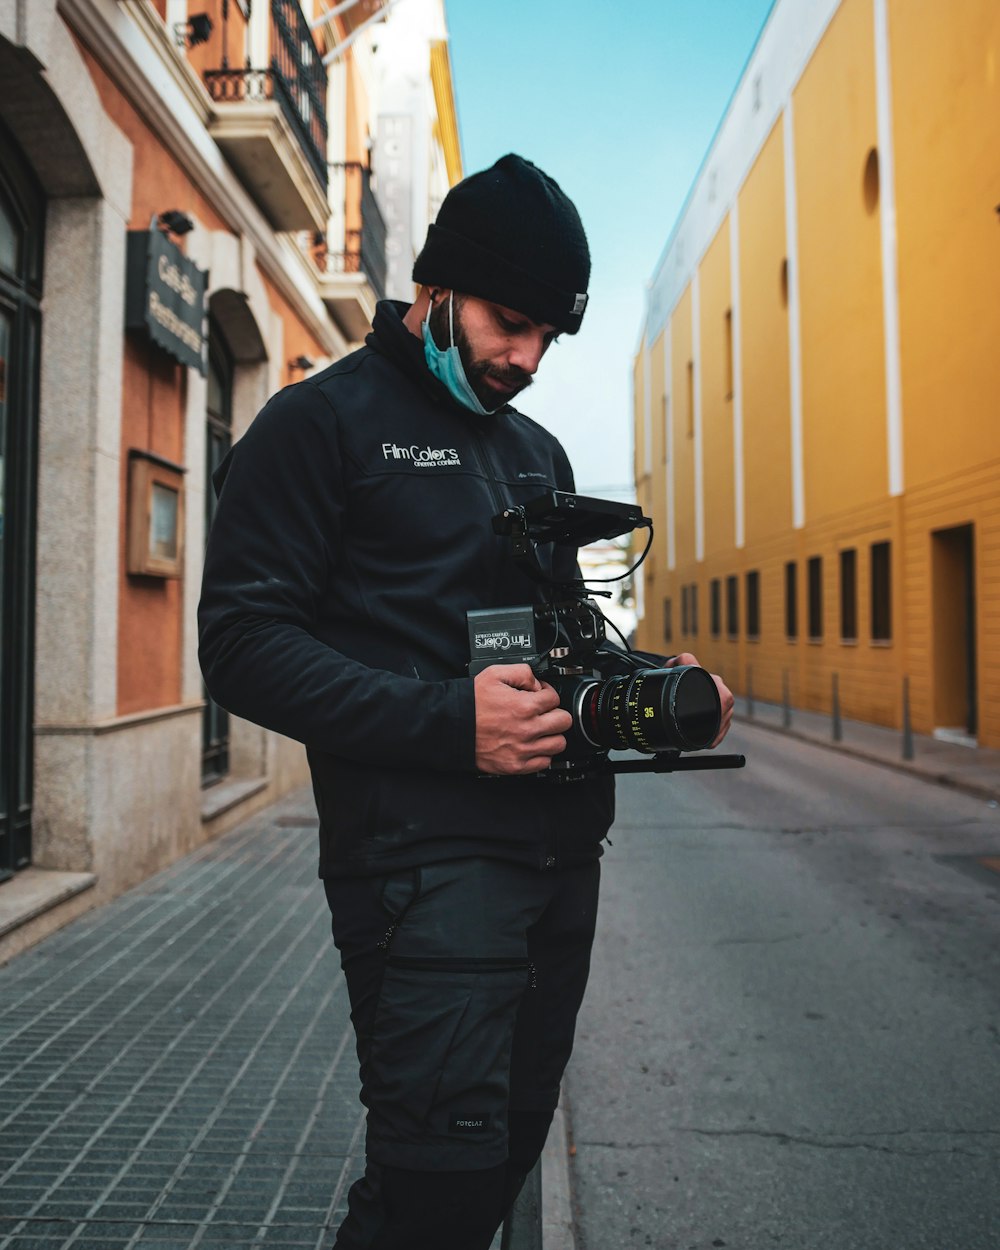 a man standing on a street holding a camera